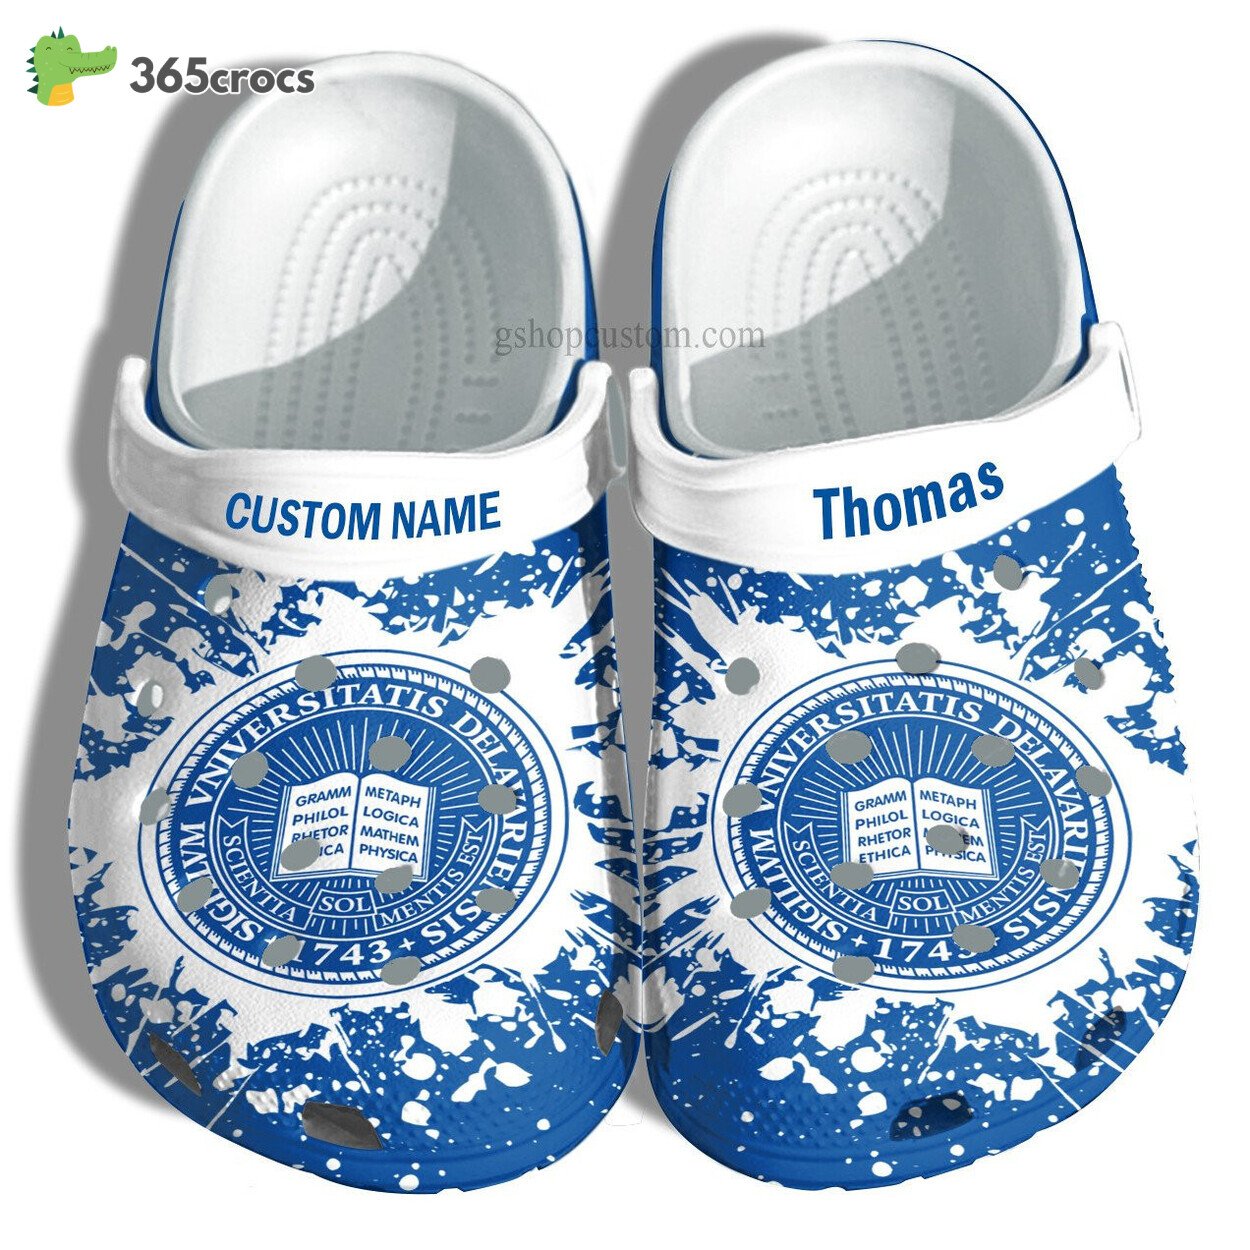 University Of Delaware Graduation Gifts Croc Shoes Customize Admission Gift Shoes